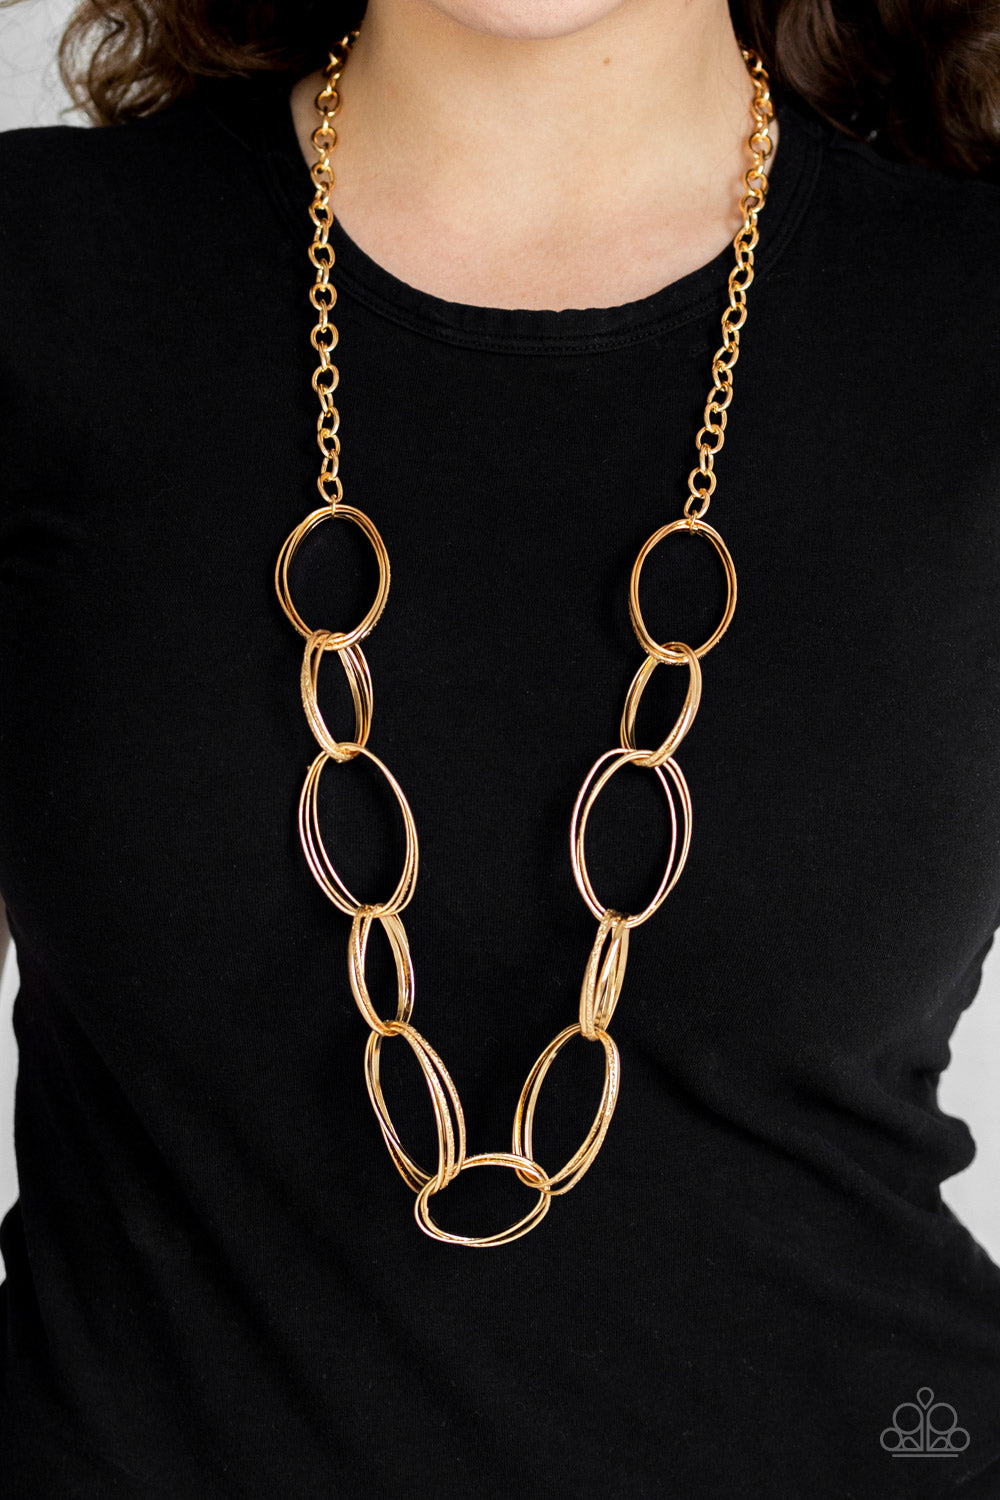 Ring Bling Gold Necklace - Paparazzi Accessories